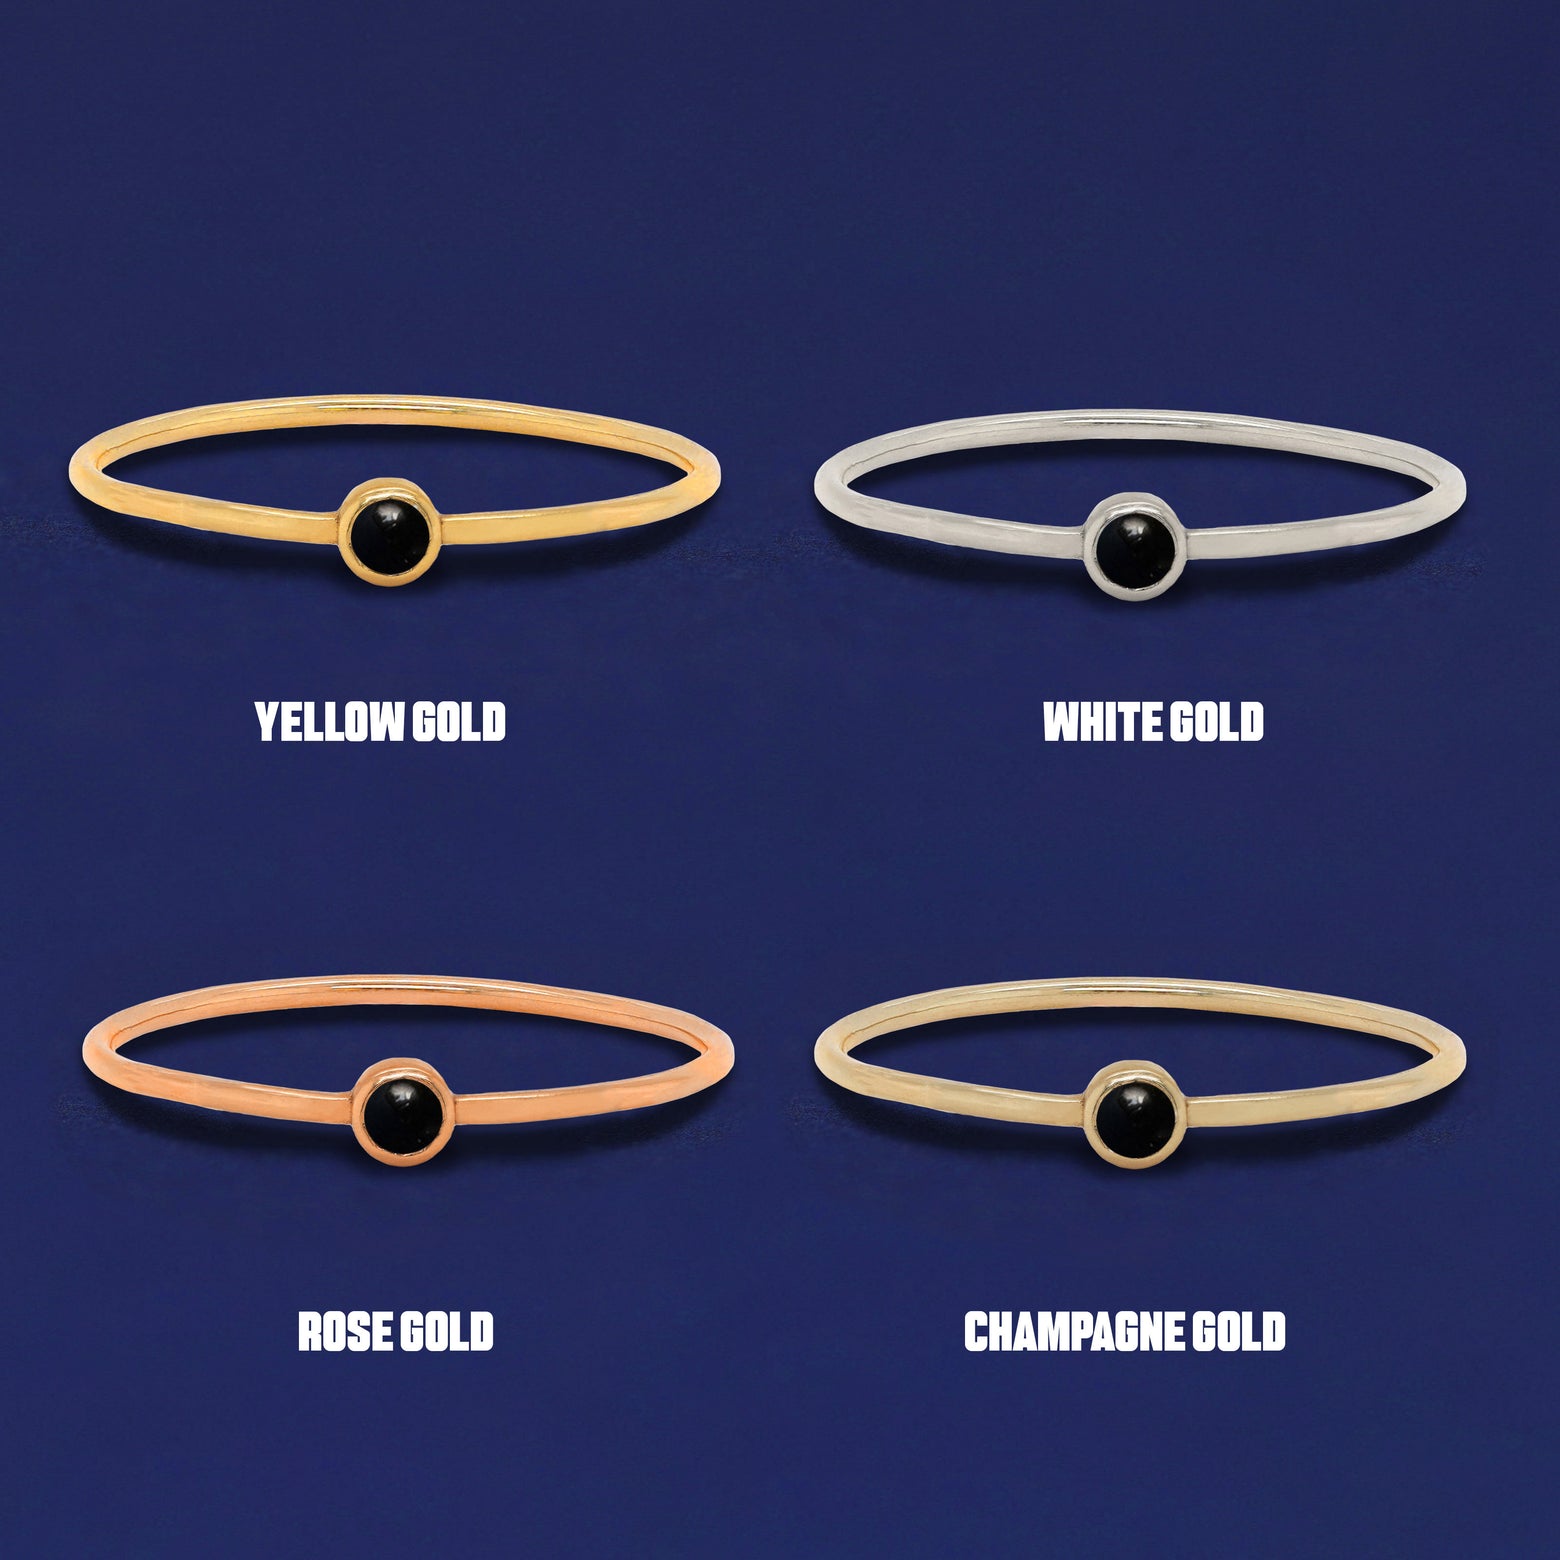 Four versions of the Onyx Ring shown in options of yellow, white, rose and champagne gold